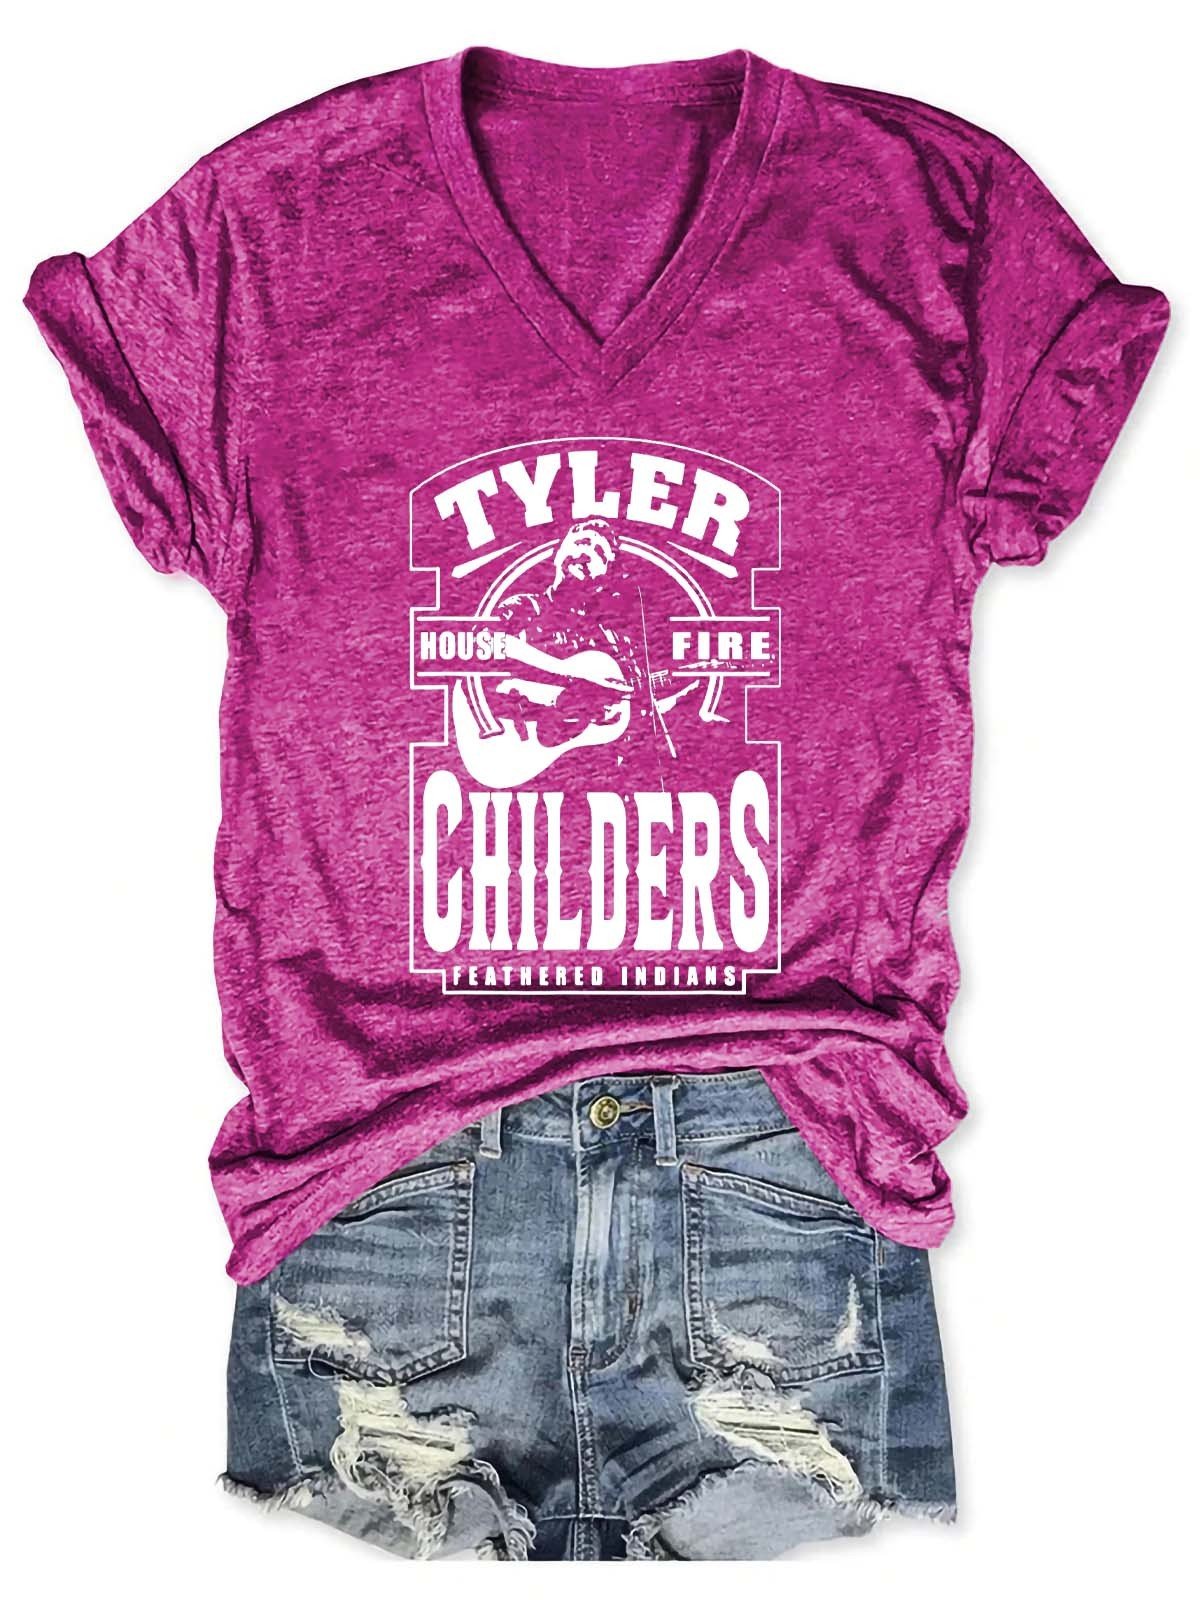 Women's Tyler Childers Feathered Indians V-Neck T-Shirt - Outlets Forever